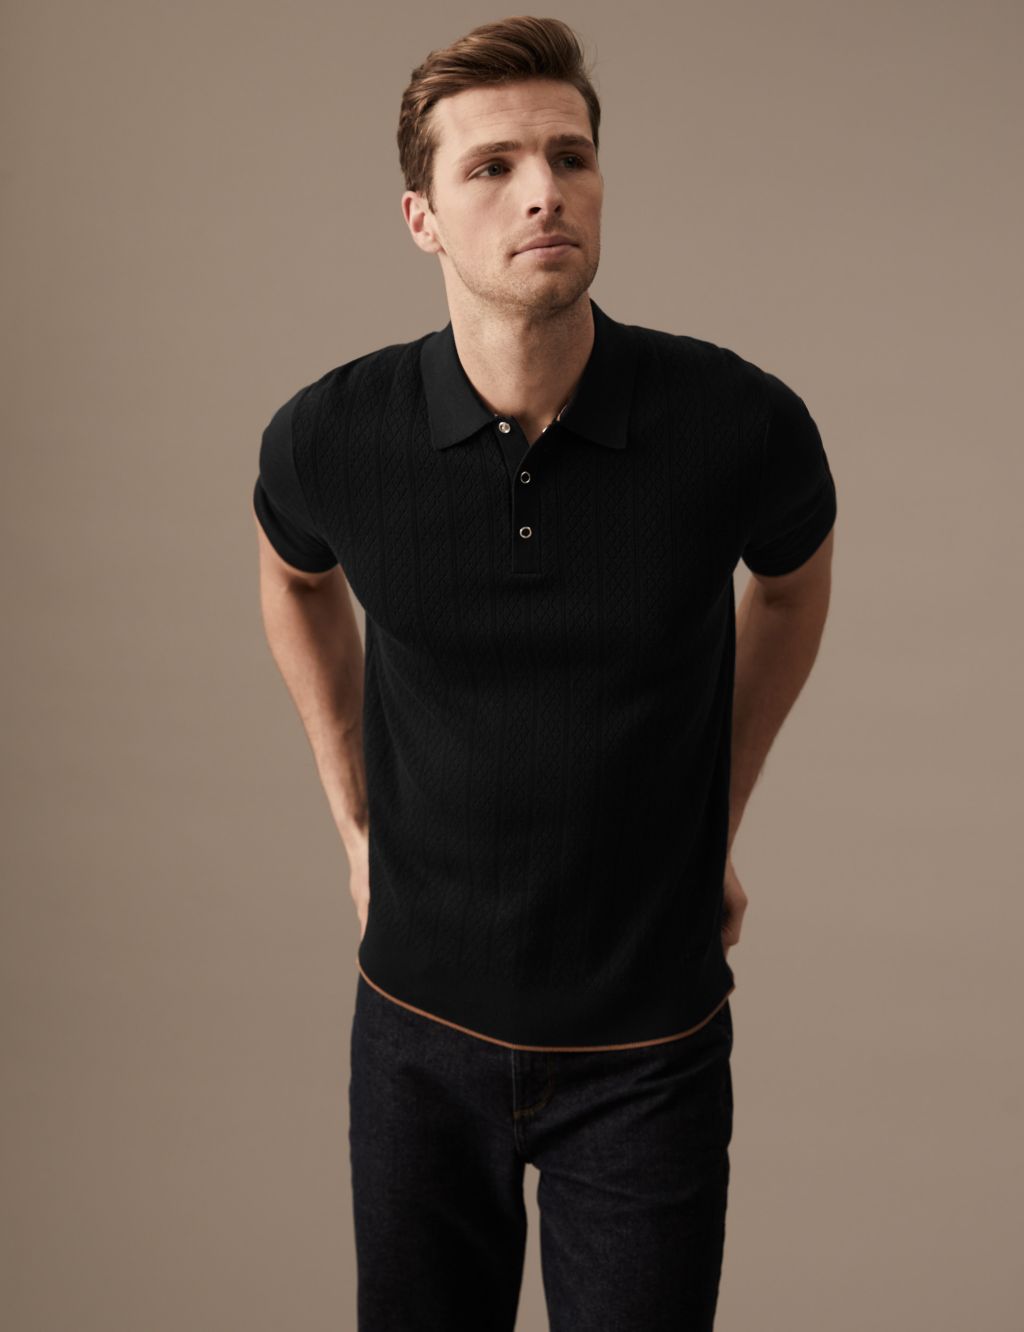 Cotton Rich Textured Knitted Polo Shirt image 2